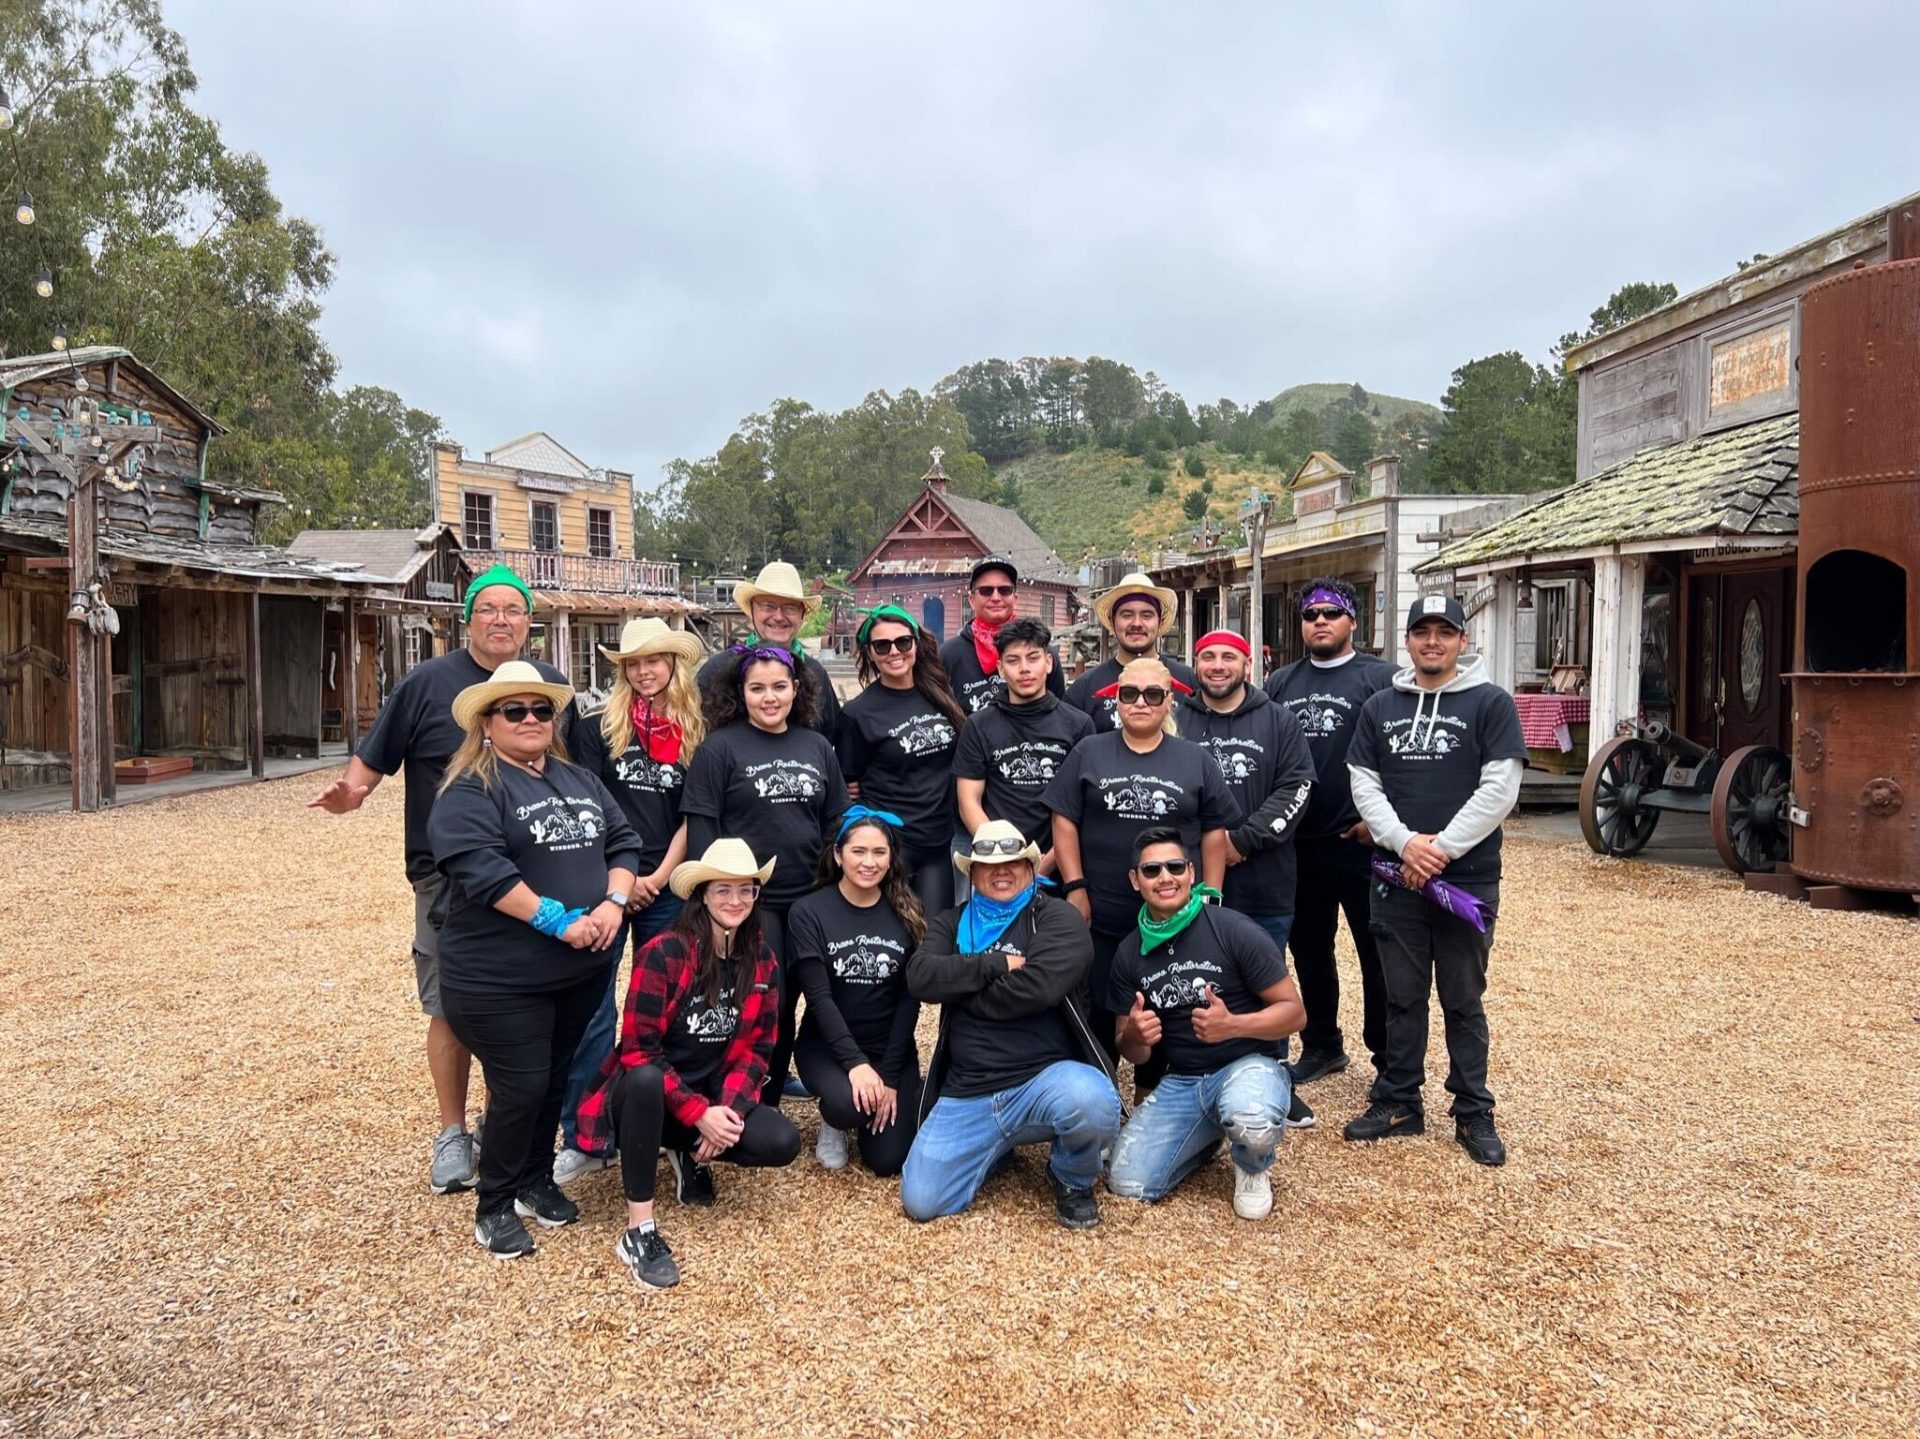 Bravo Restoration experts posing in front of an old western town after successfully completing fire damage remediation and smoke damage remediation.